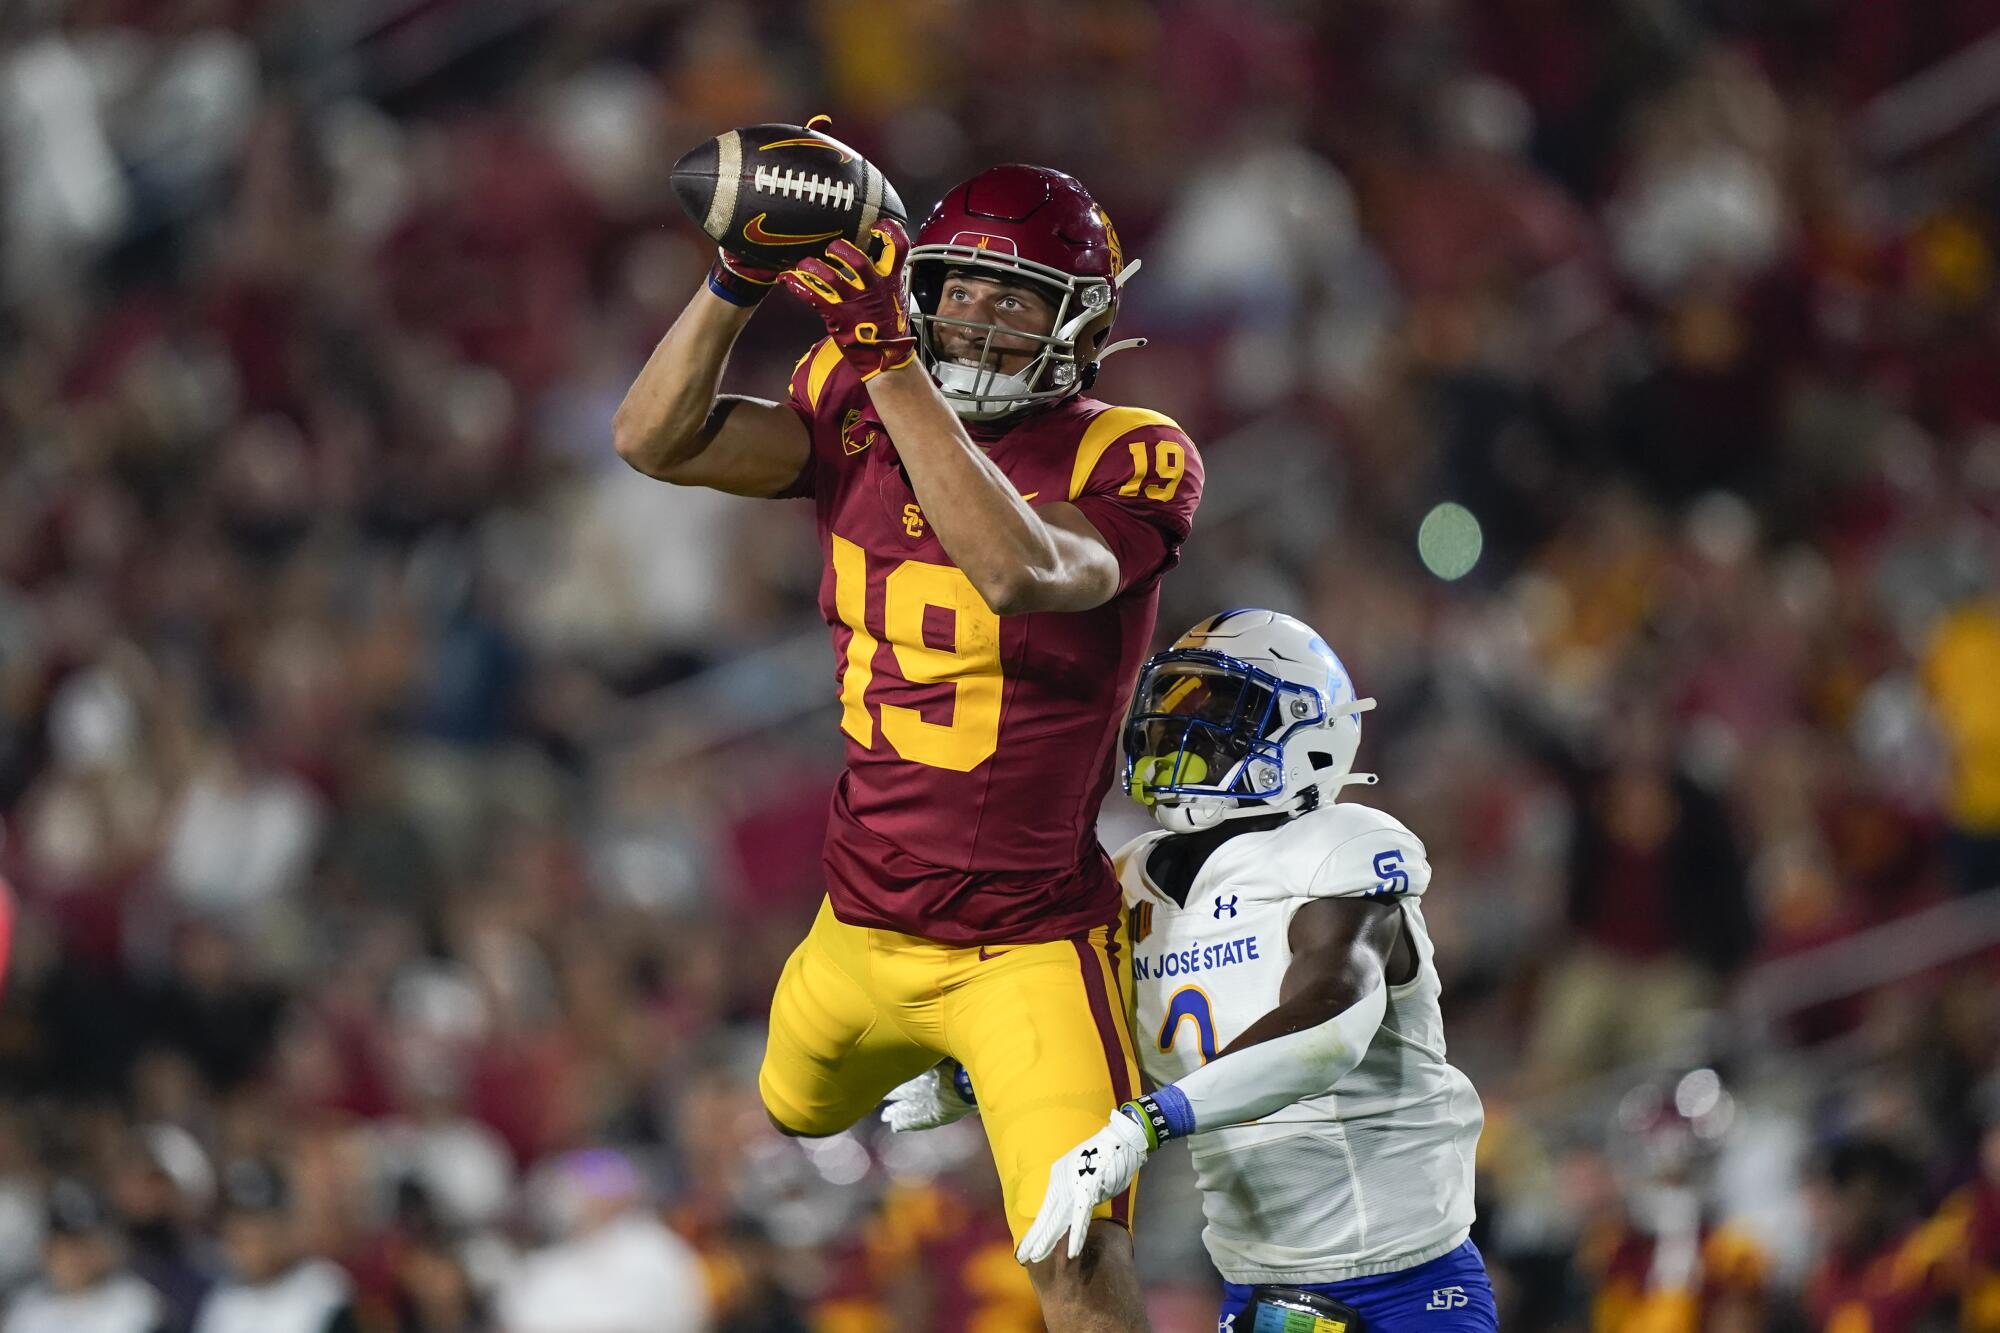 Duce Robinson catches a pass for USC.